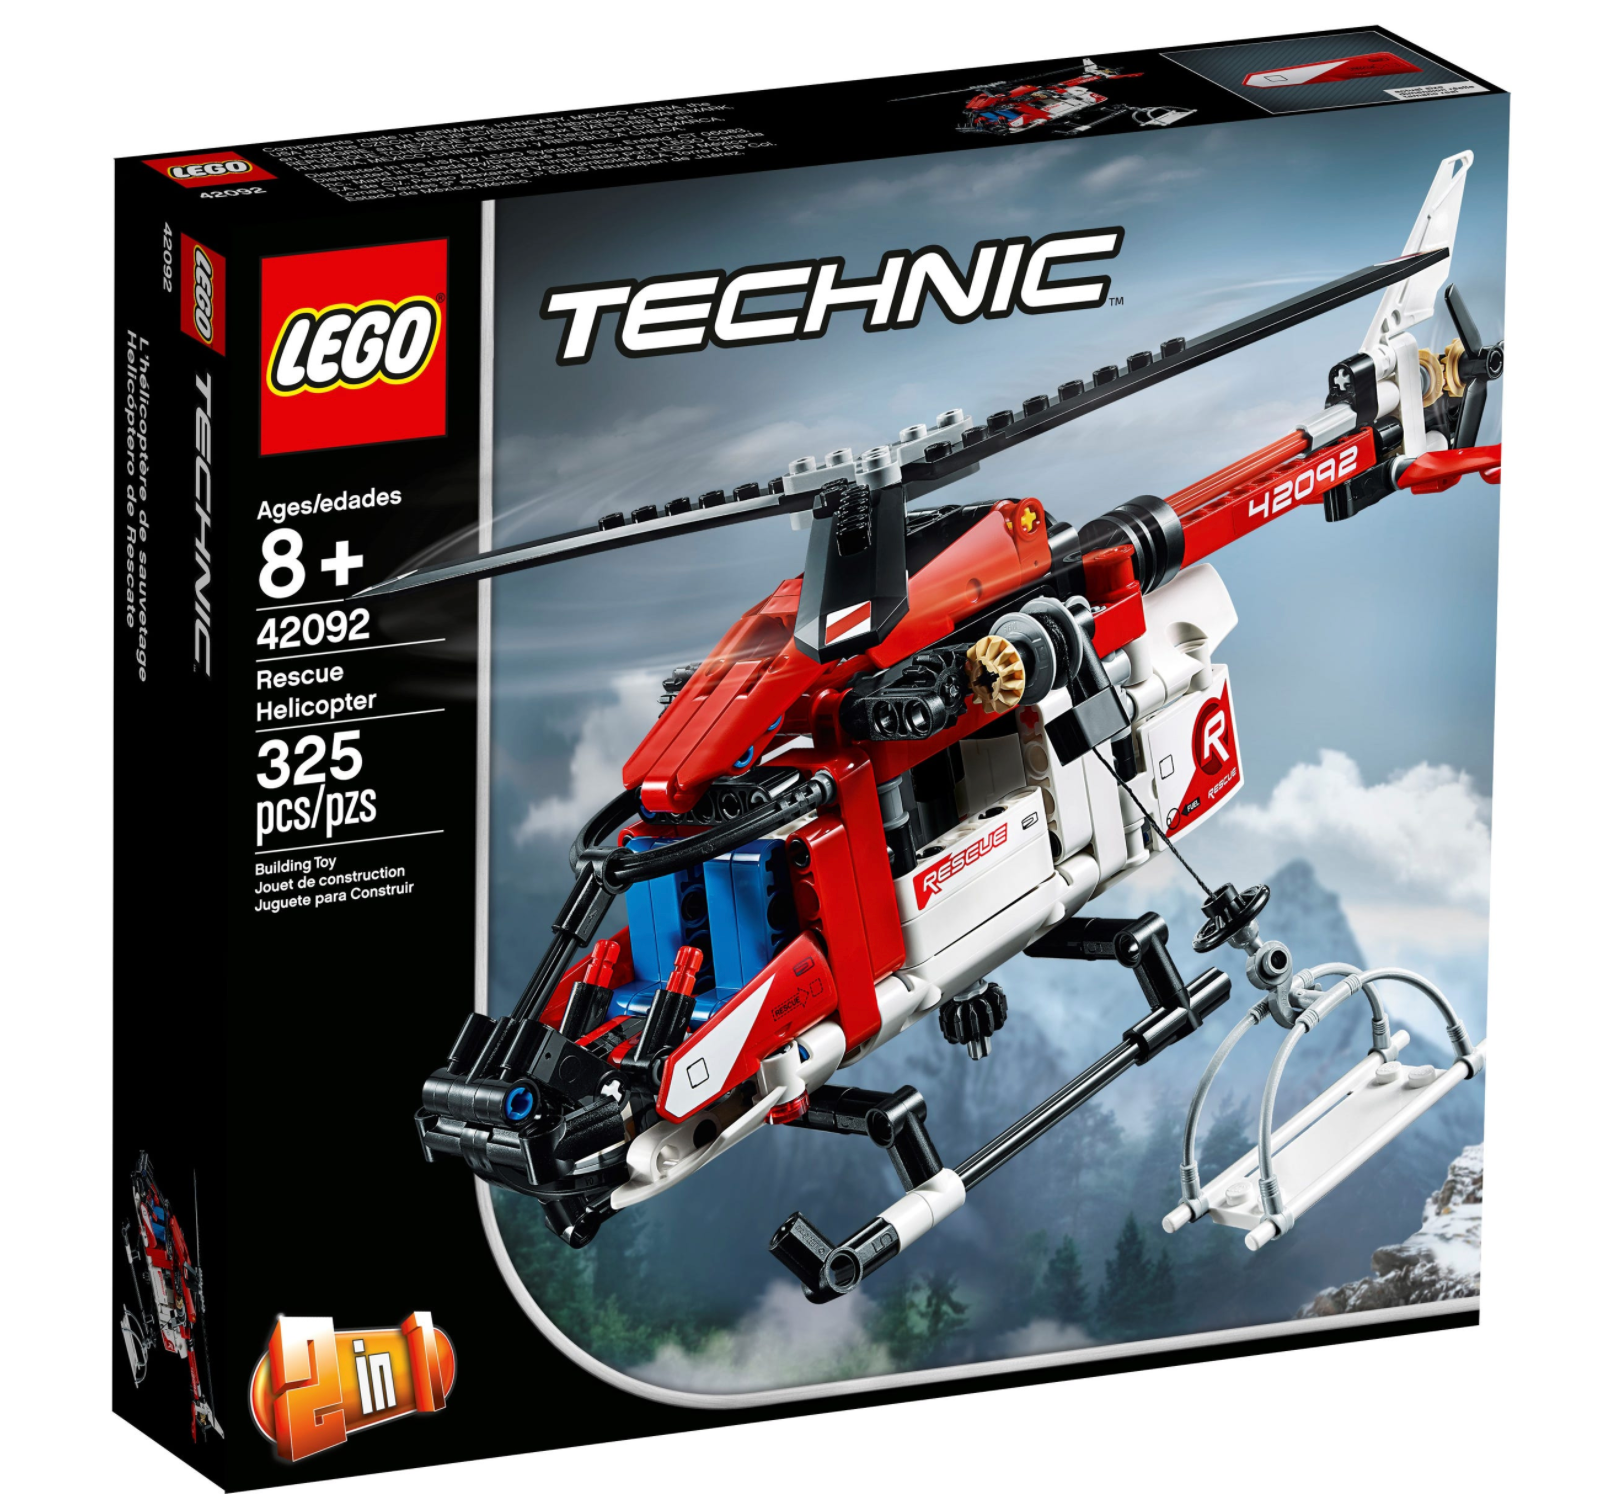 LEGO: Technic - Rescue Helicopter